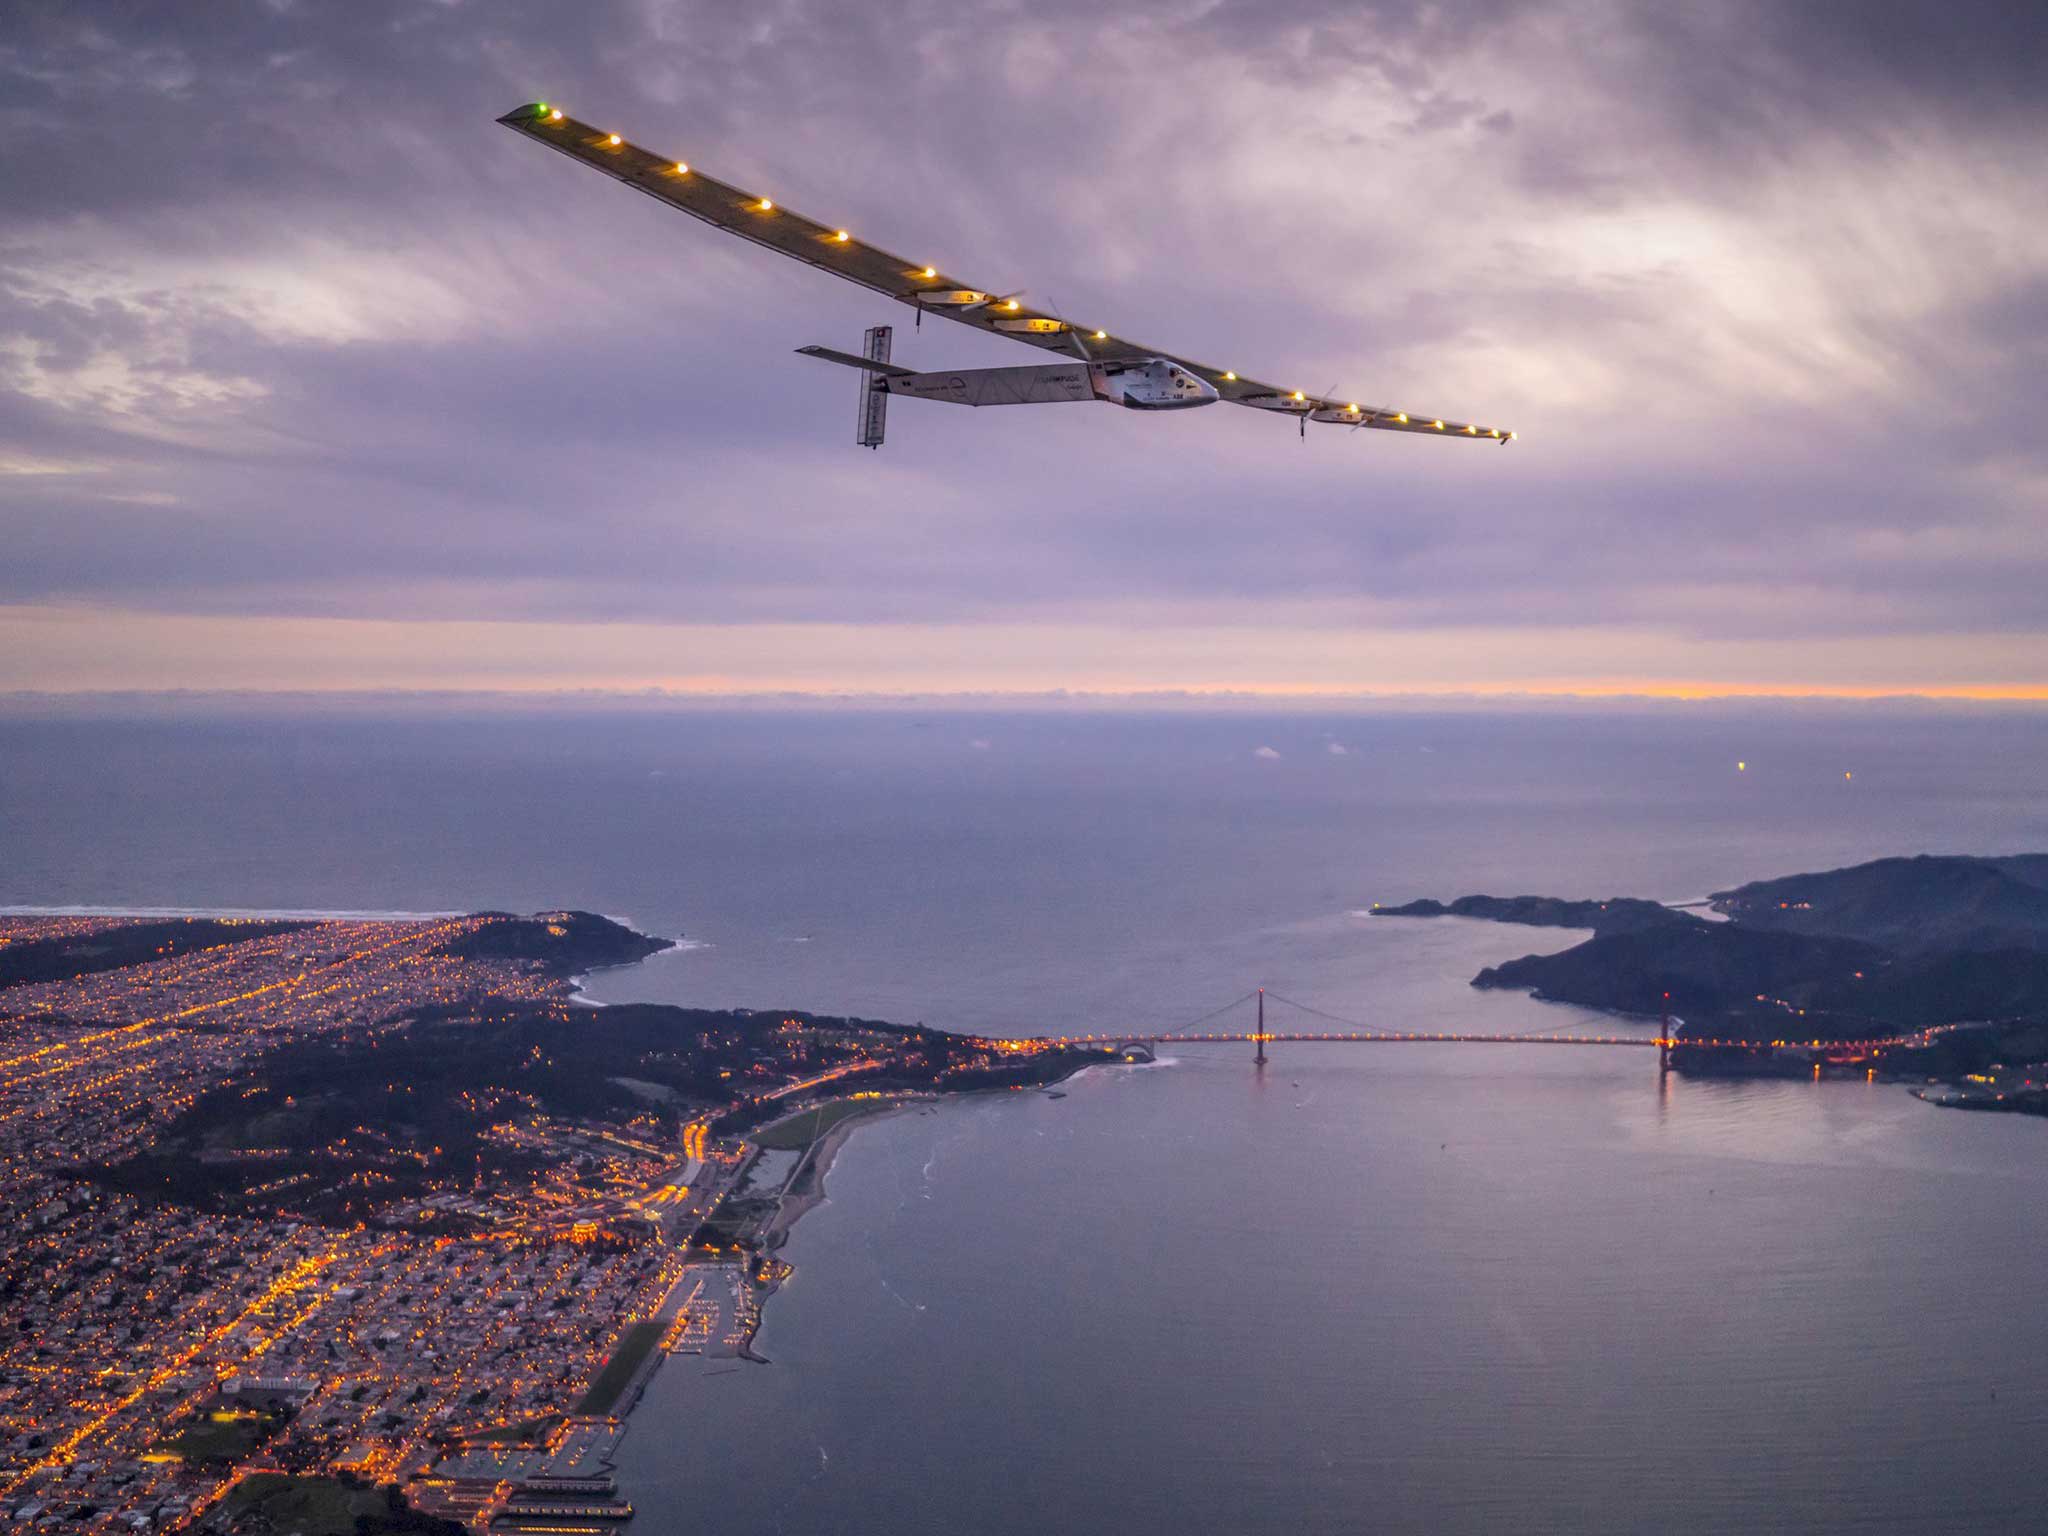 "Solar Impulse 2", a solar-powered plane piloted by Bertrand Piccard of Switzerland, flies over the Golden Gate bridge in San Francisco, before landing on Moffett Airfield following a 62-hour flight from Hawaii